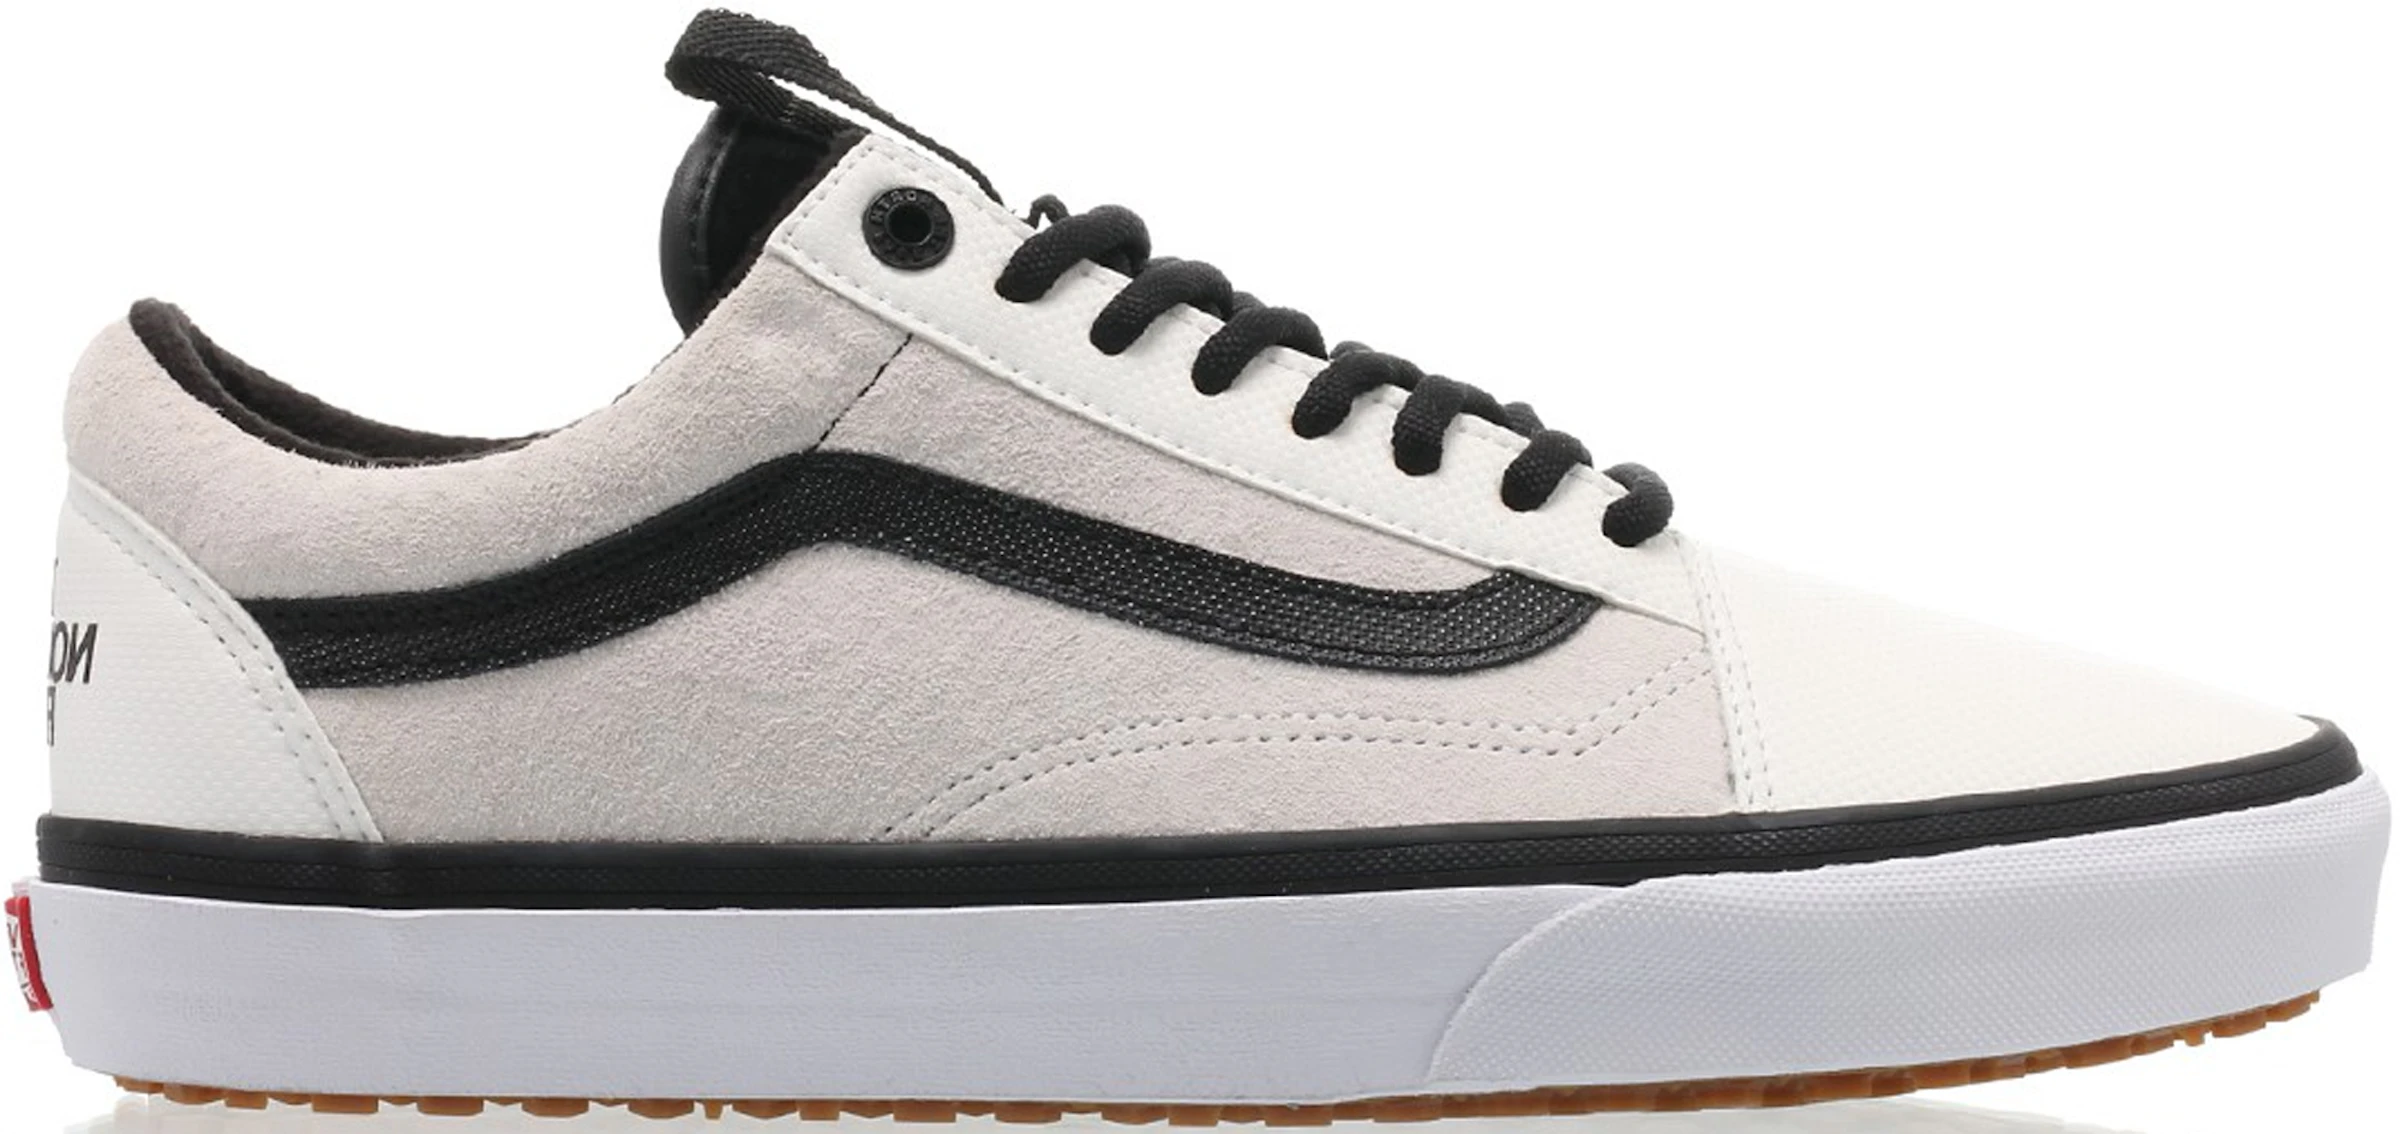 repentino Chispa  chispear Increíble Vans Old Skool MTE DX The North Face White - VA348GQWH - US